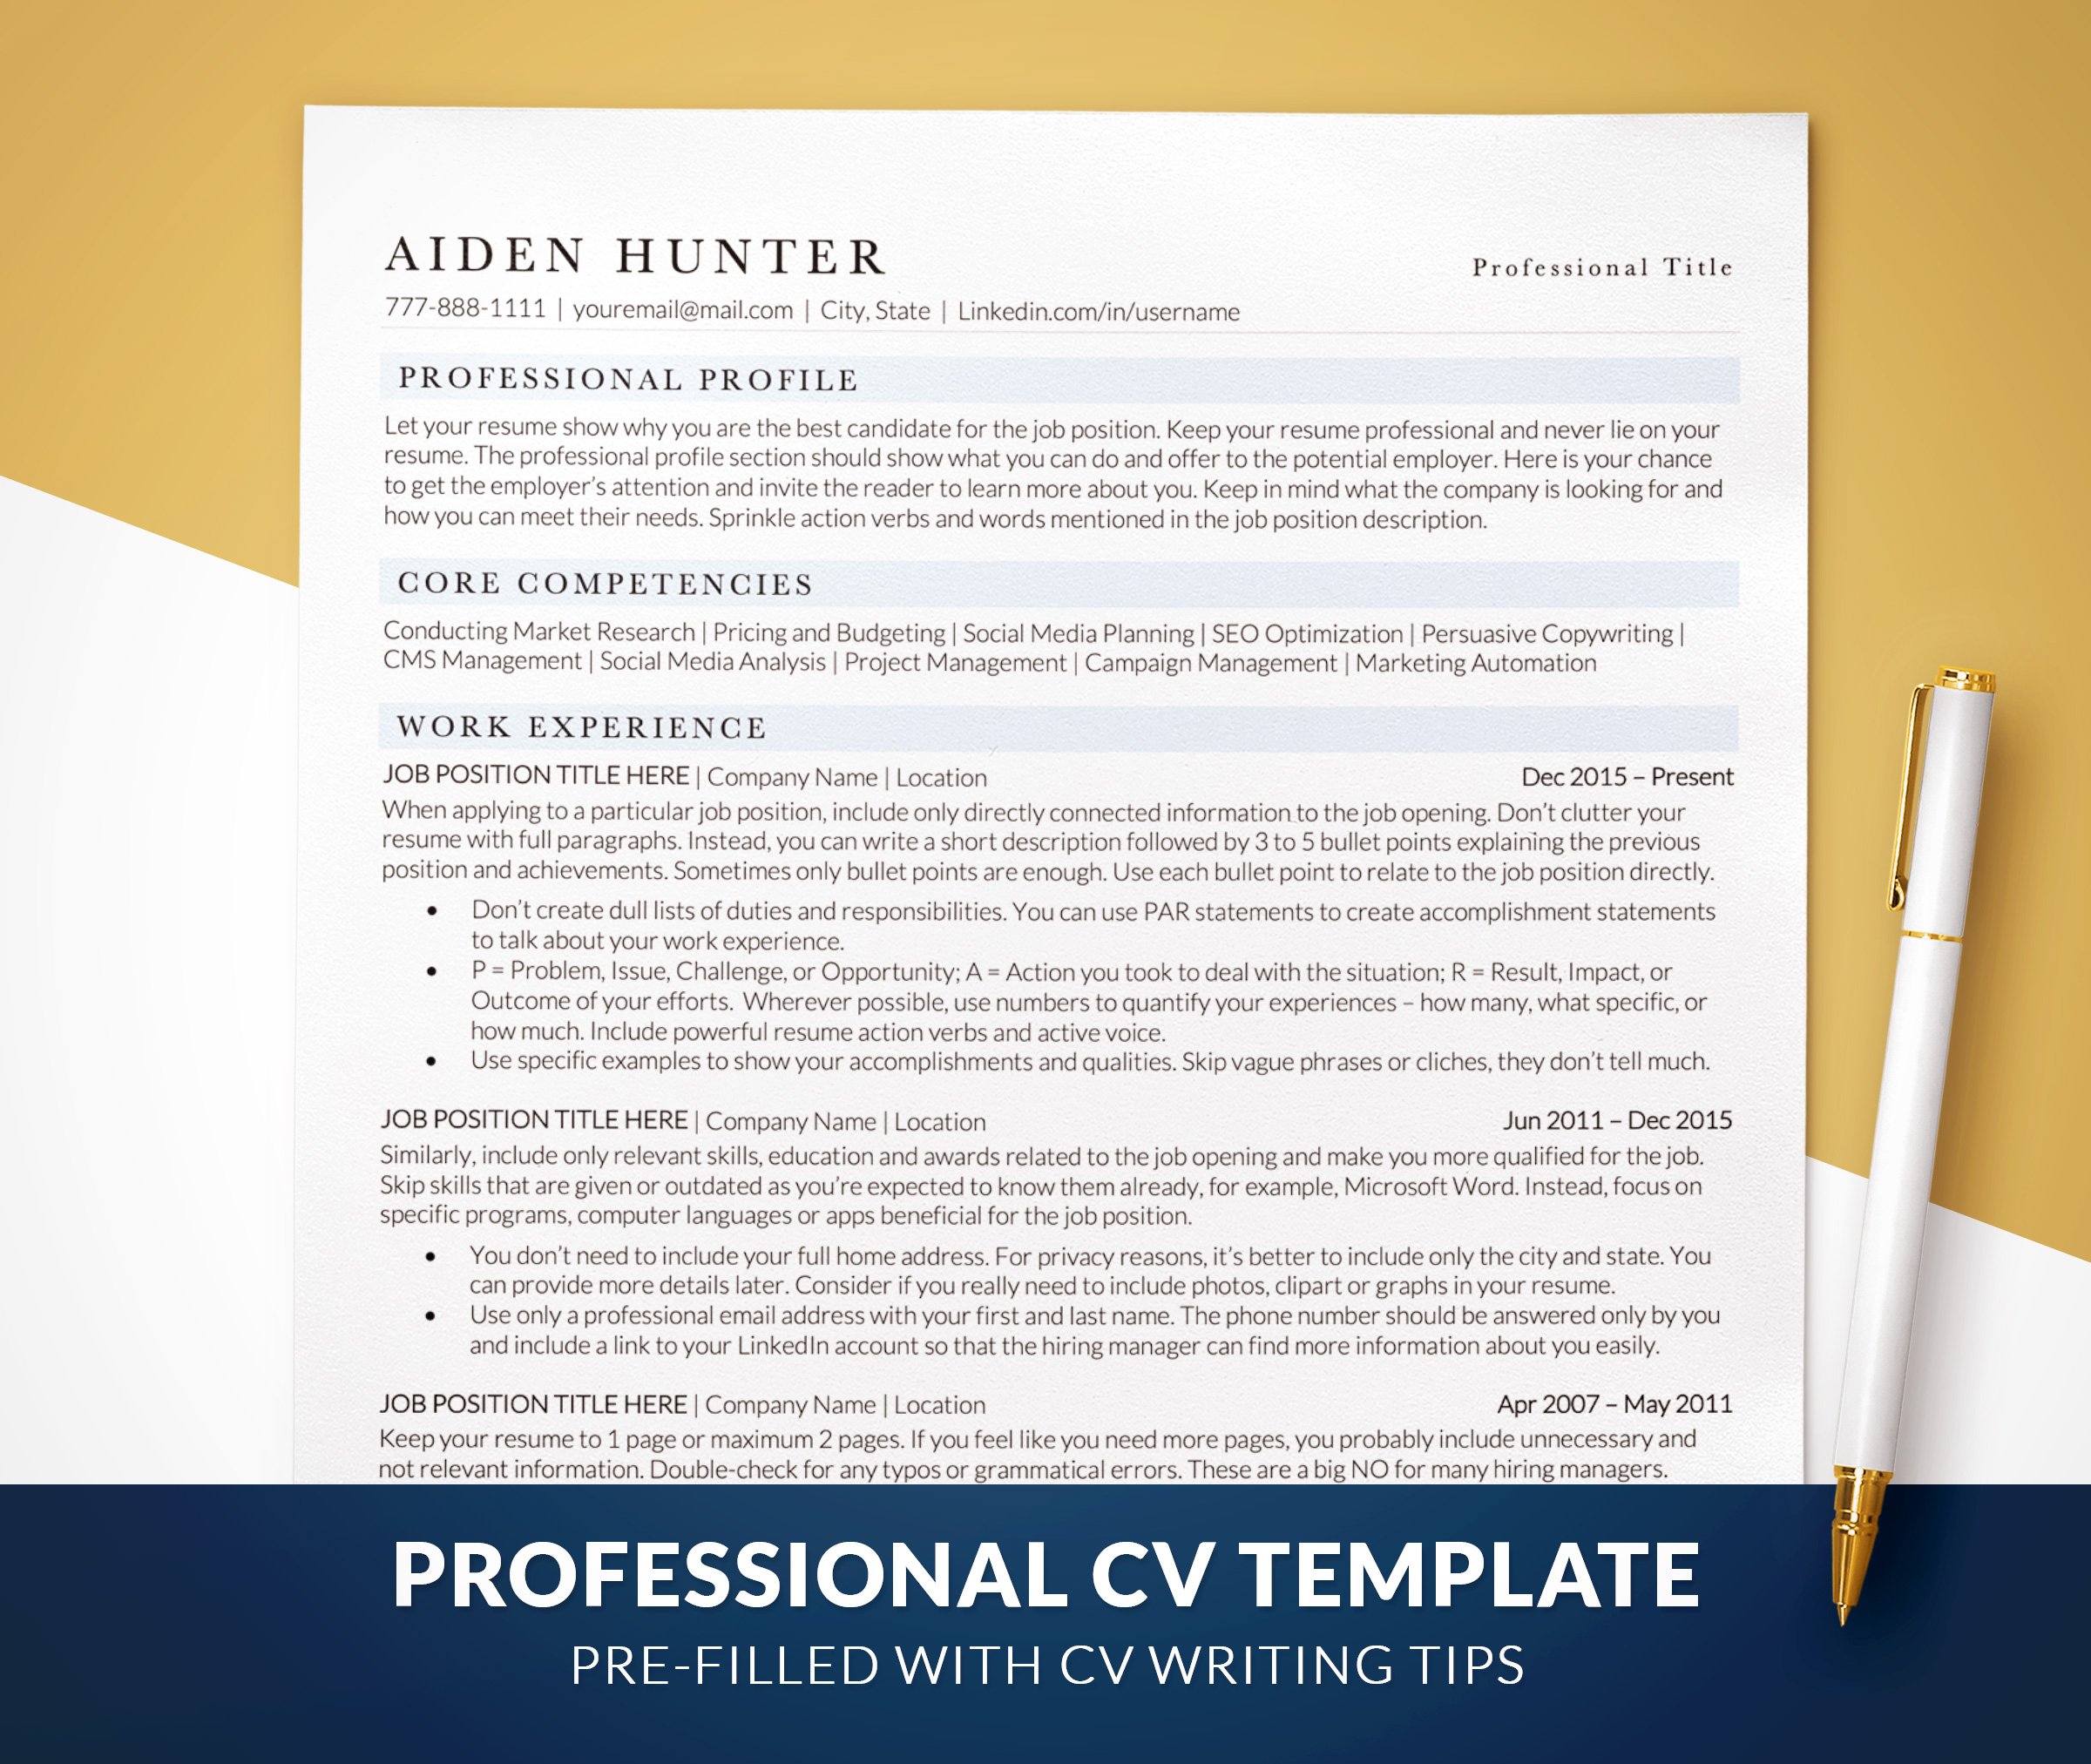 Executive CV Template Word & Pages cover image.